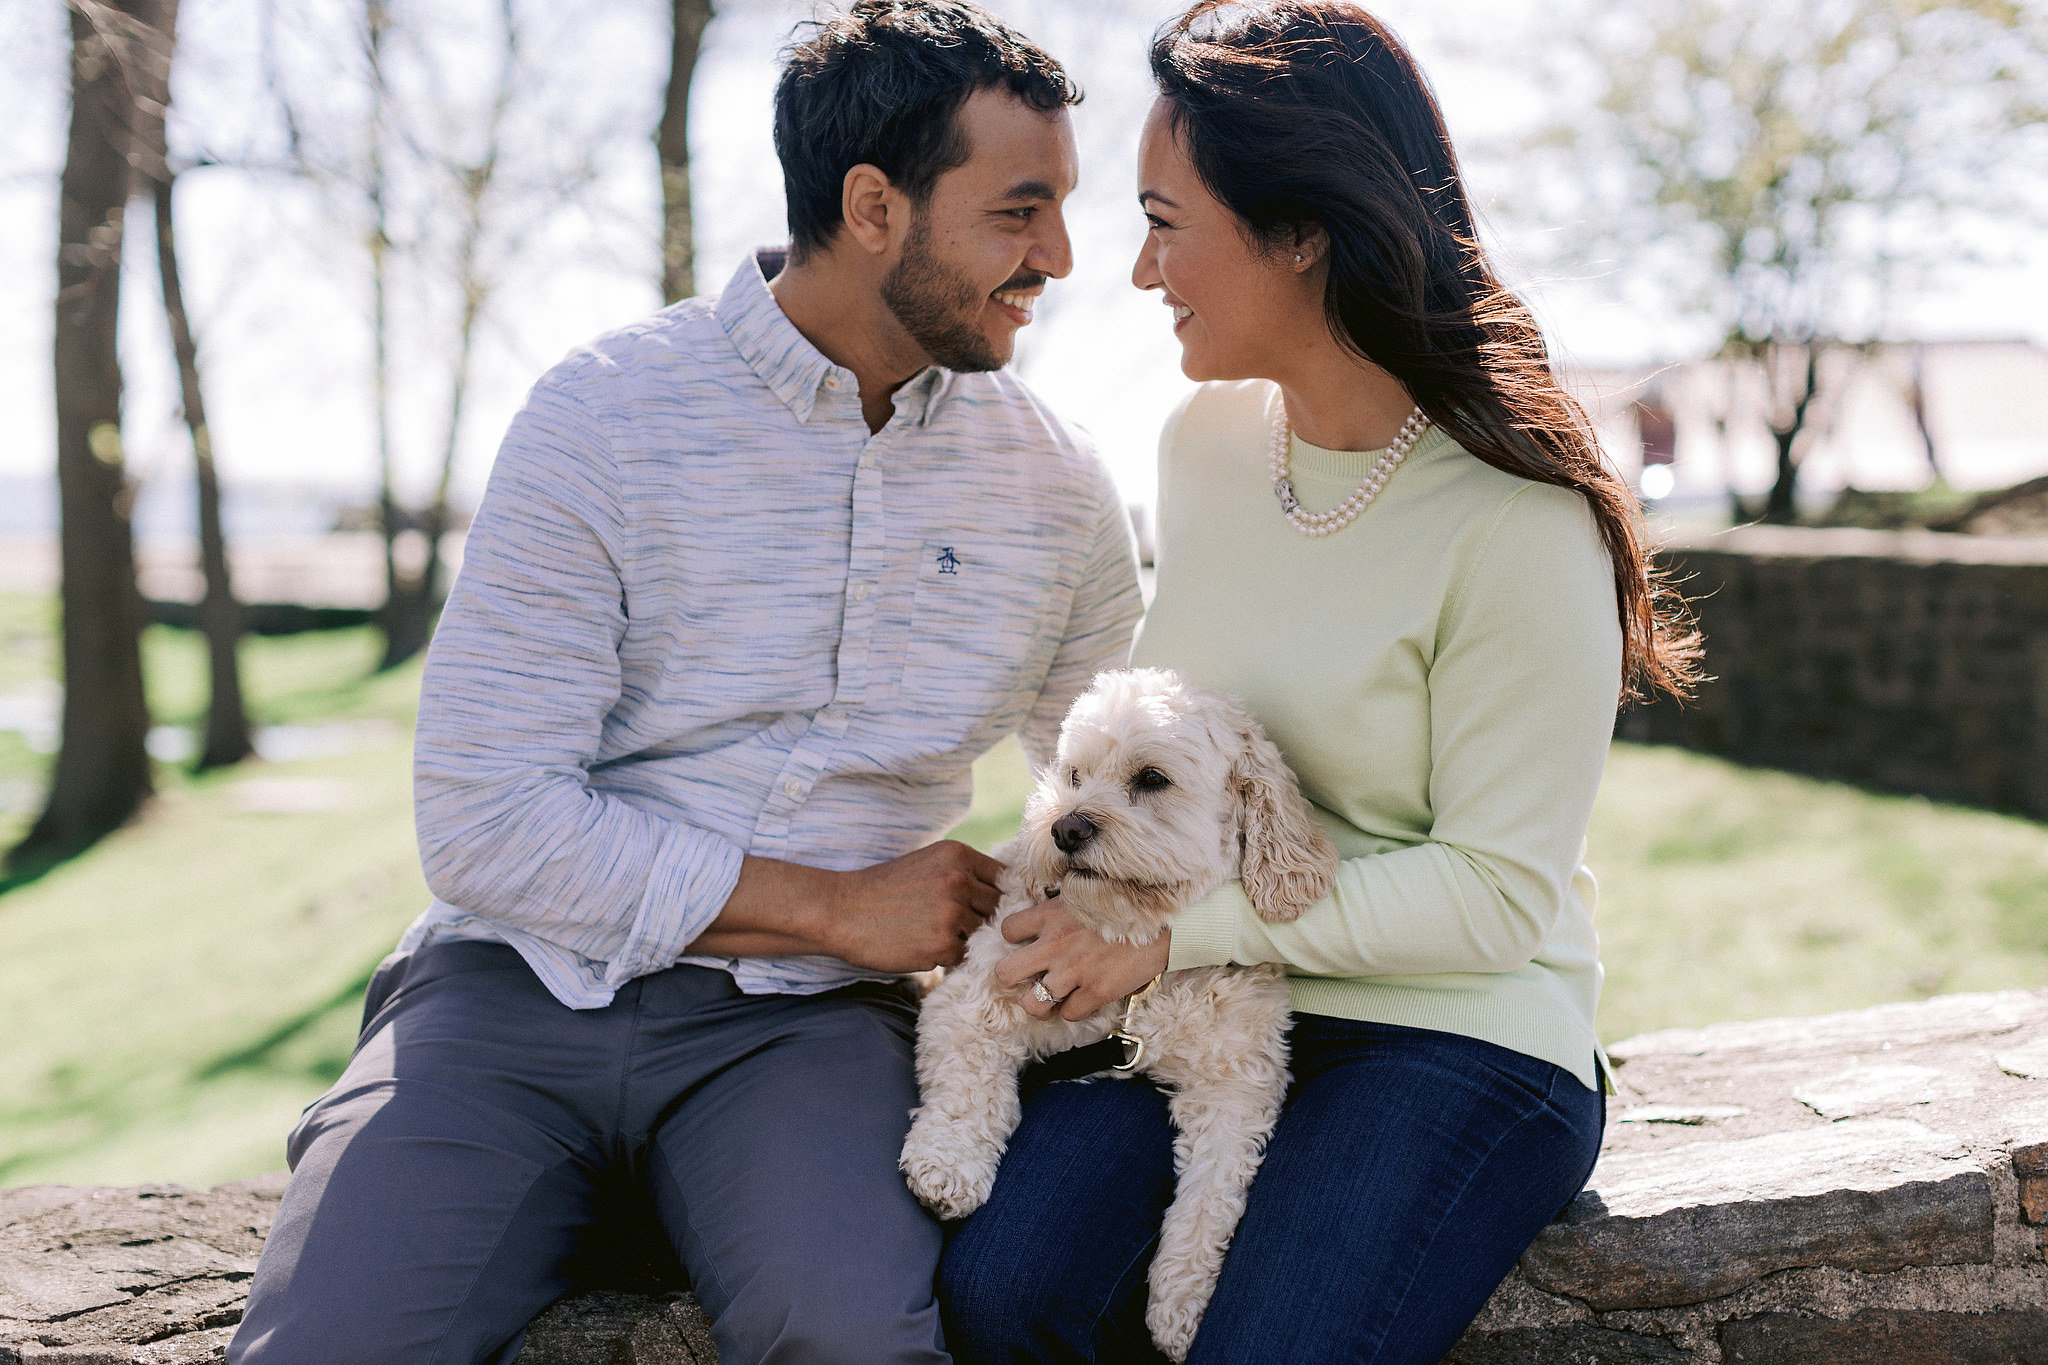 The engaged couple is with their dog in a park in New York. Editorial image by Jenny Fu Studio